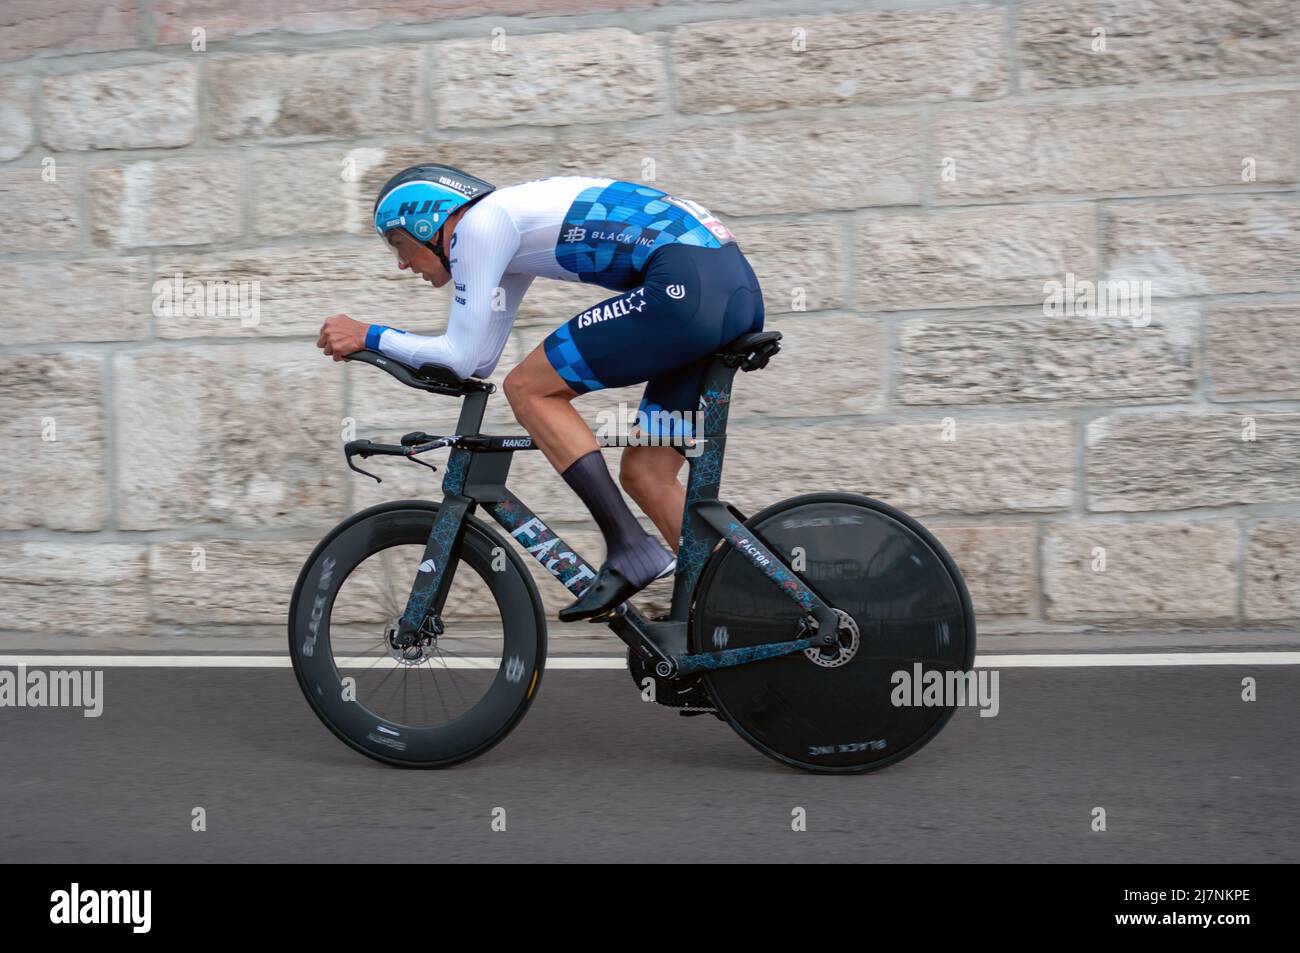 BUDAPEST, HUNGARY - MAY 07, 2022: Pro cyclist Reto Hollenstein ISRAEL - PREMIER TECH, Giro D'Italia Stage 2 Time trial - cycling competition on May 07 Stock Photo